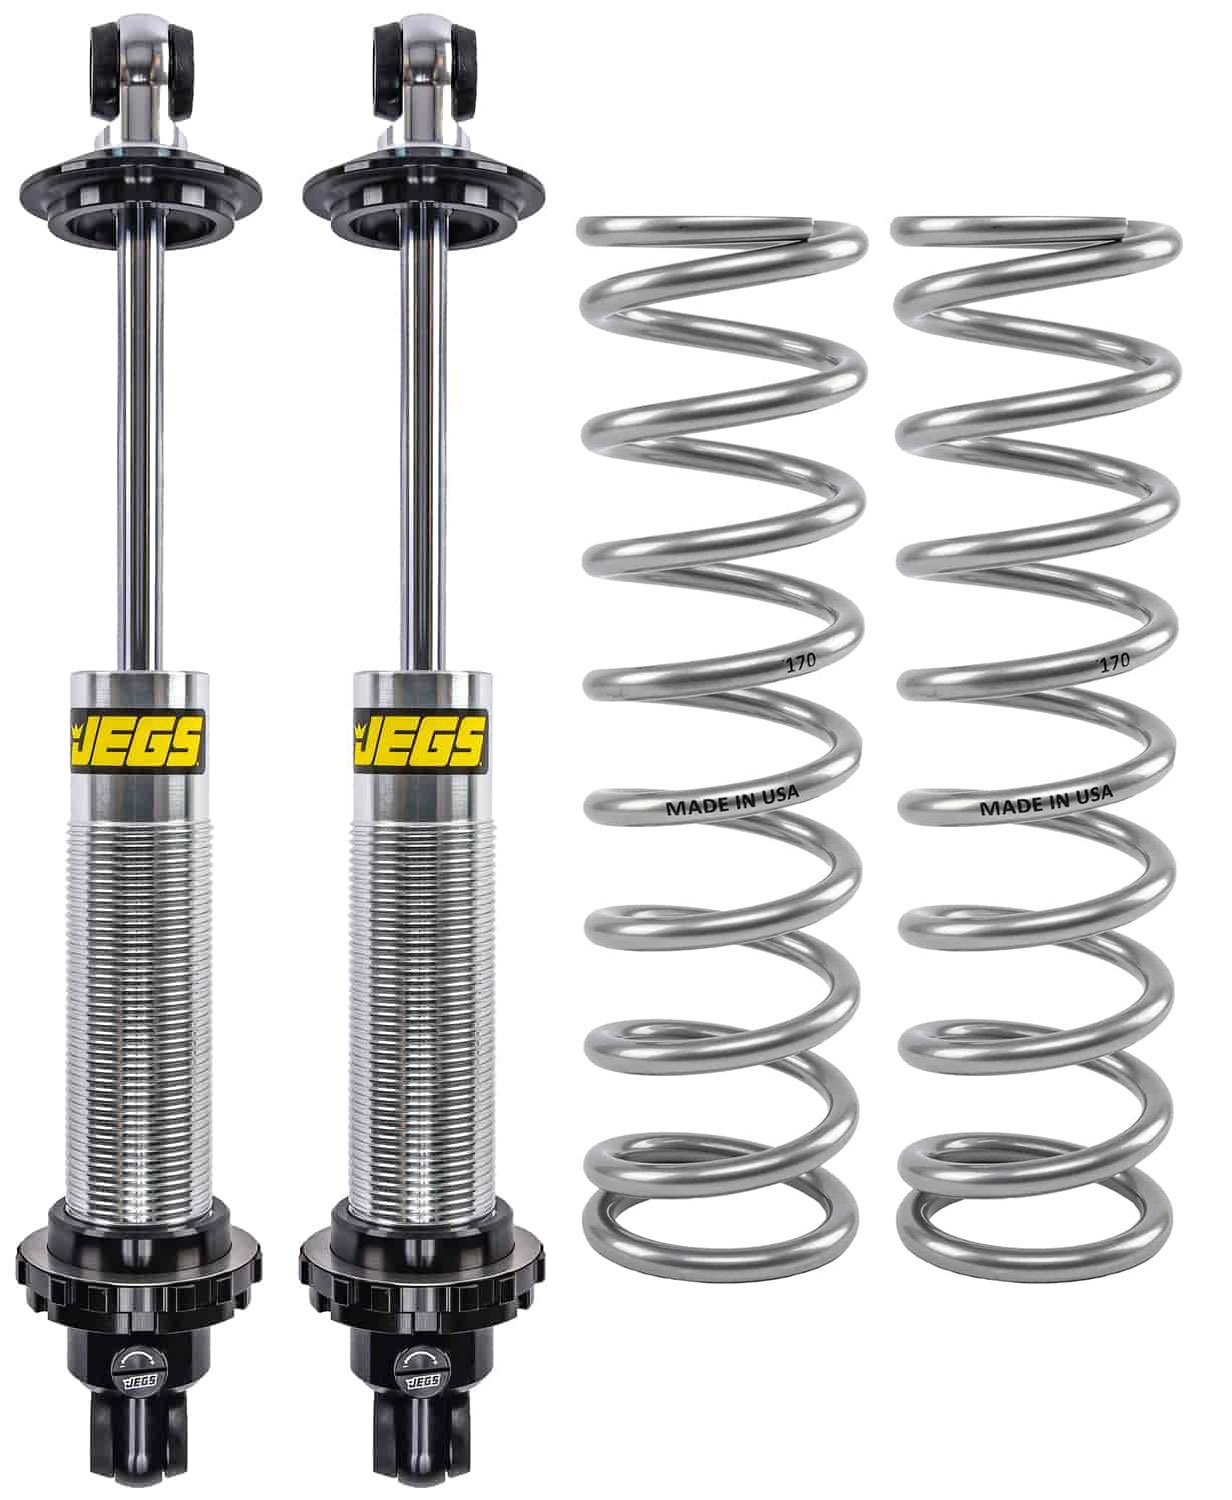 Single Adjustable Coil-Over Shocks and Coil-Over Springs Kit [12 in., 170 lbs./in. Springs]